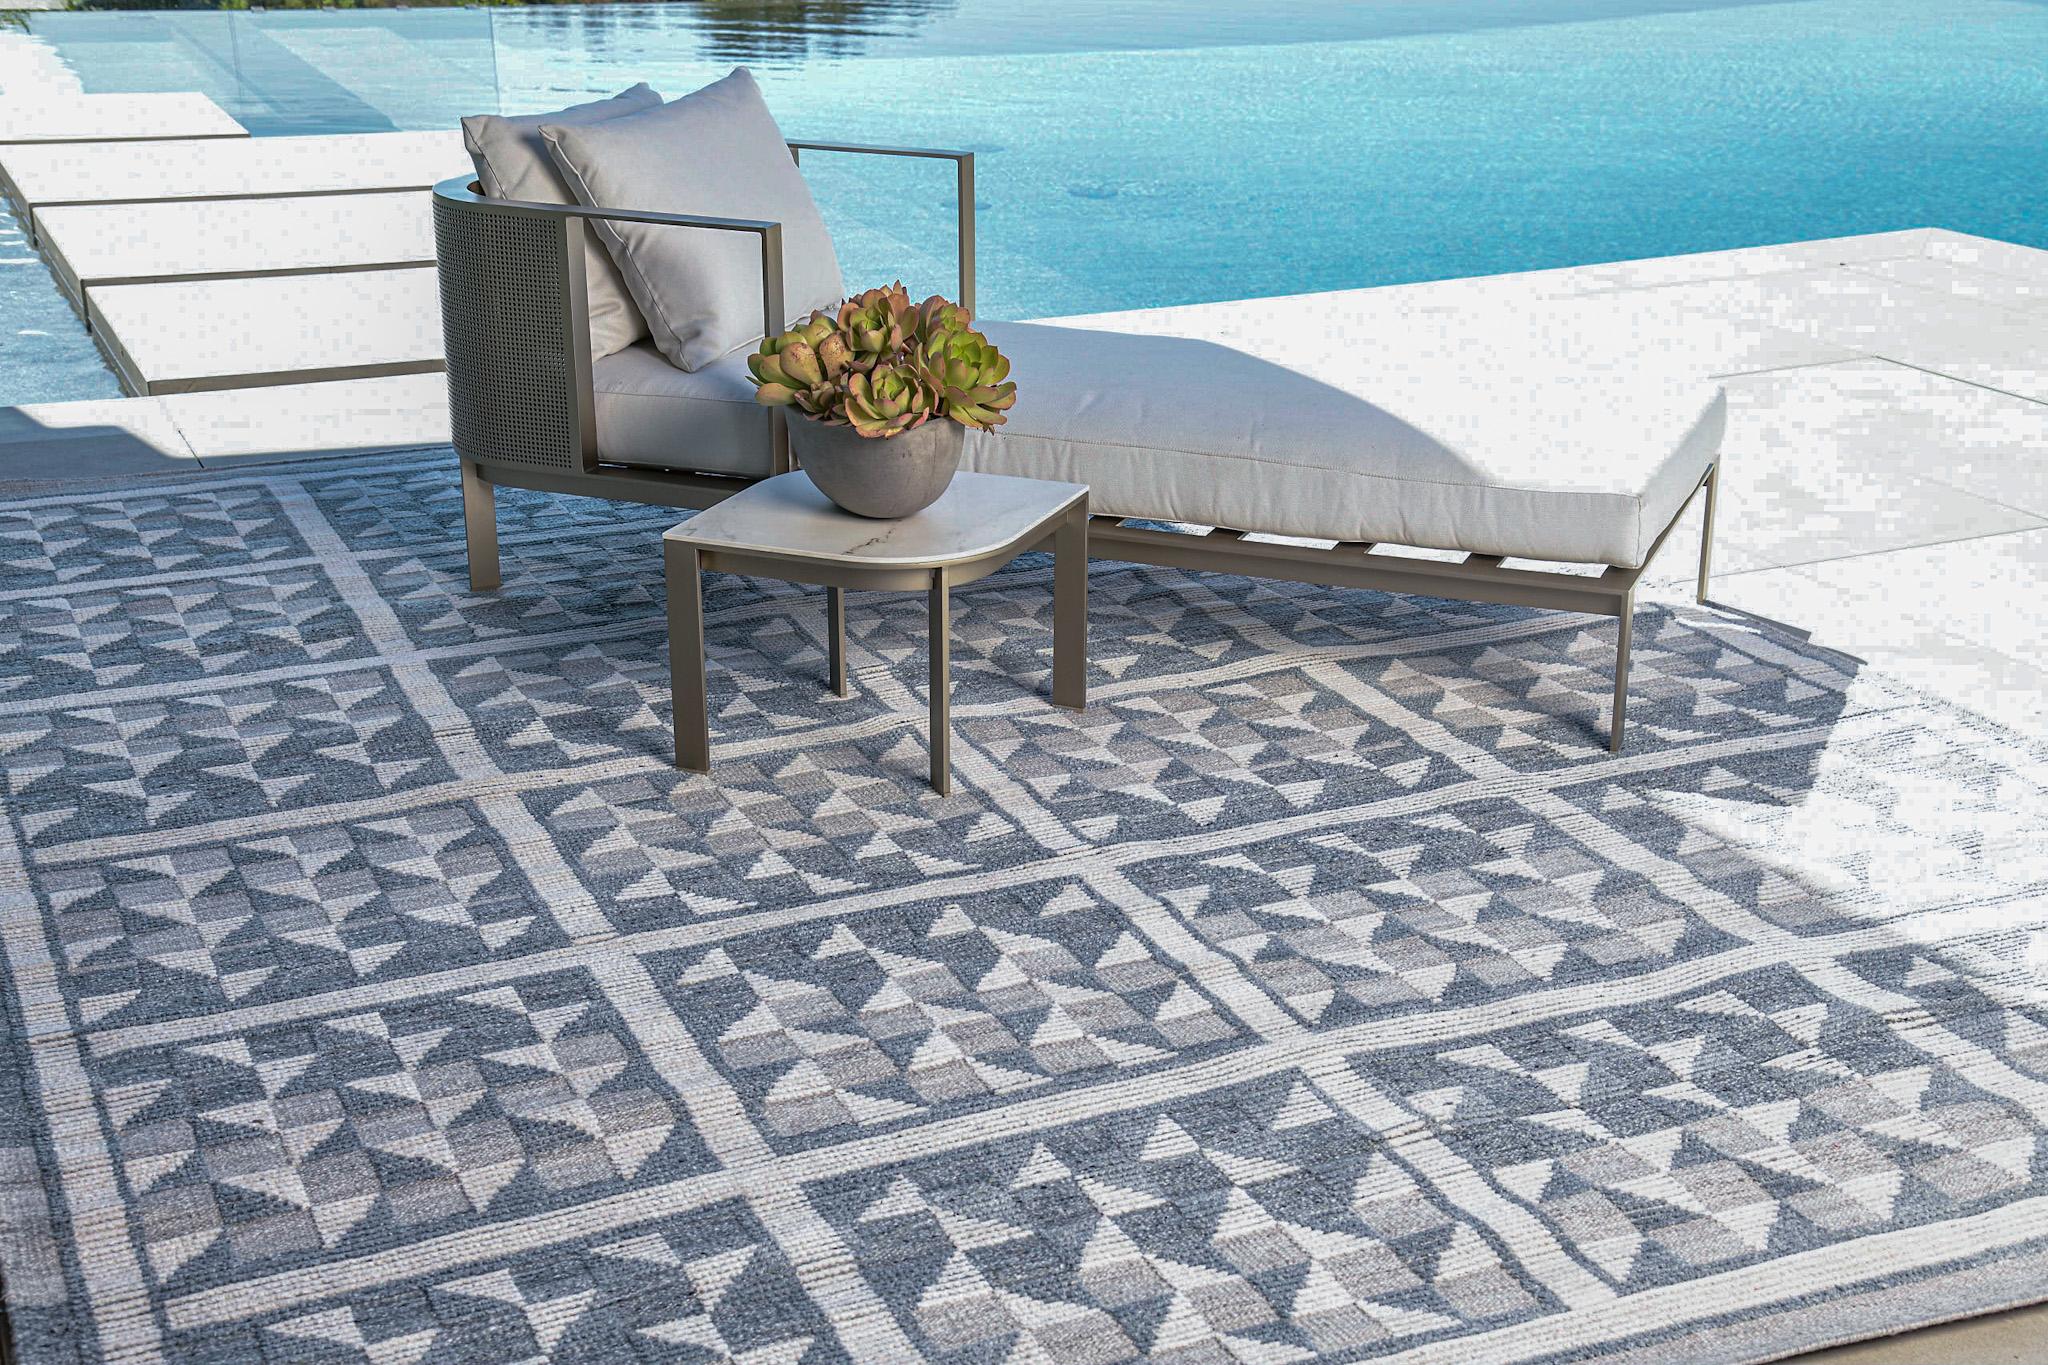 Enjoy the fresh air with Nasim, rugs that work indoors and out.

Rug Number
31432
Size
9' 0